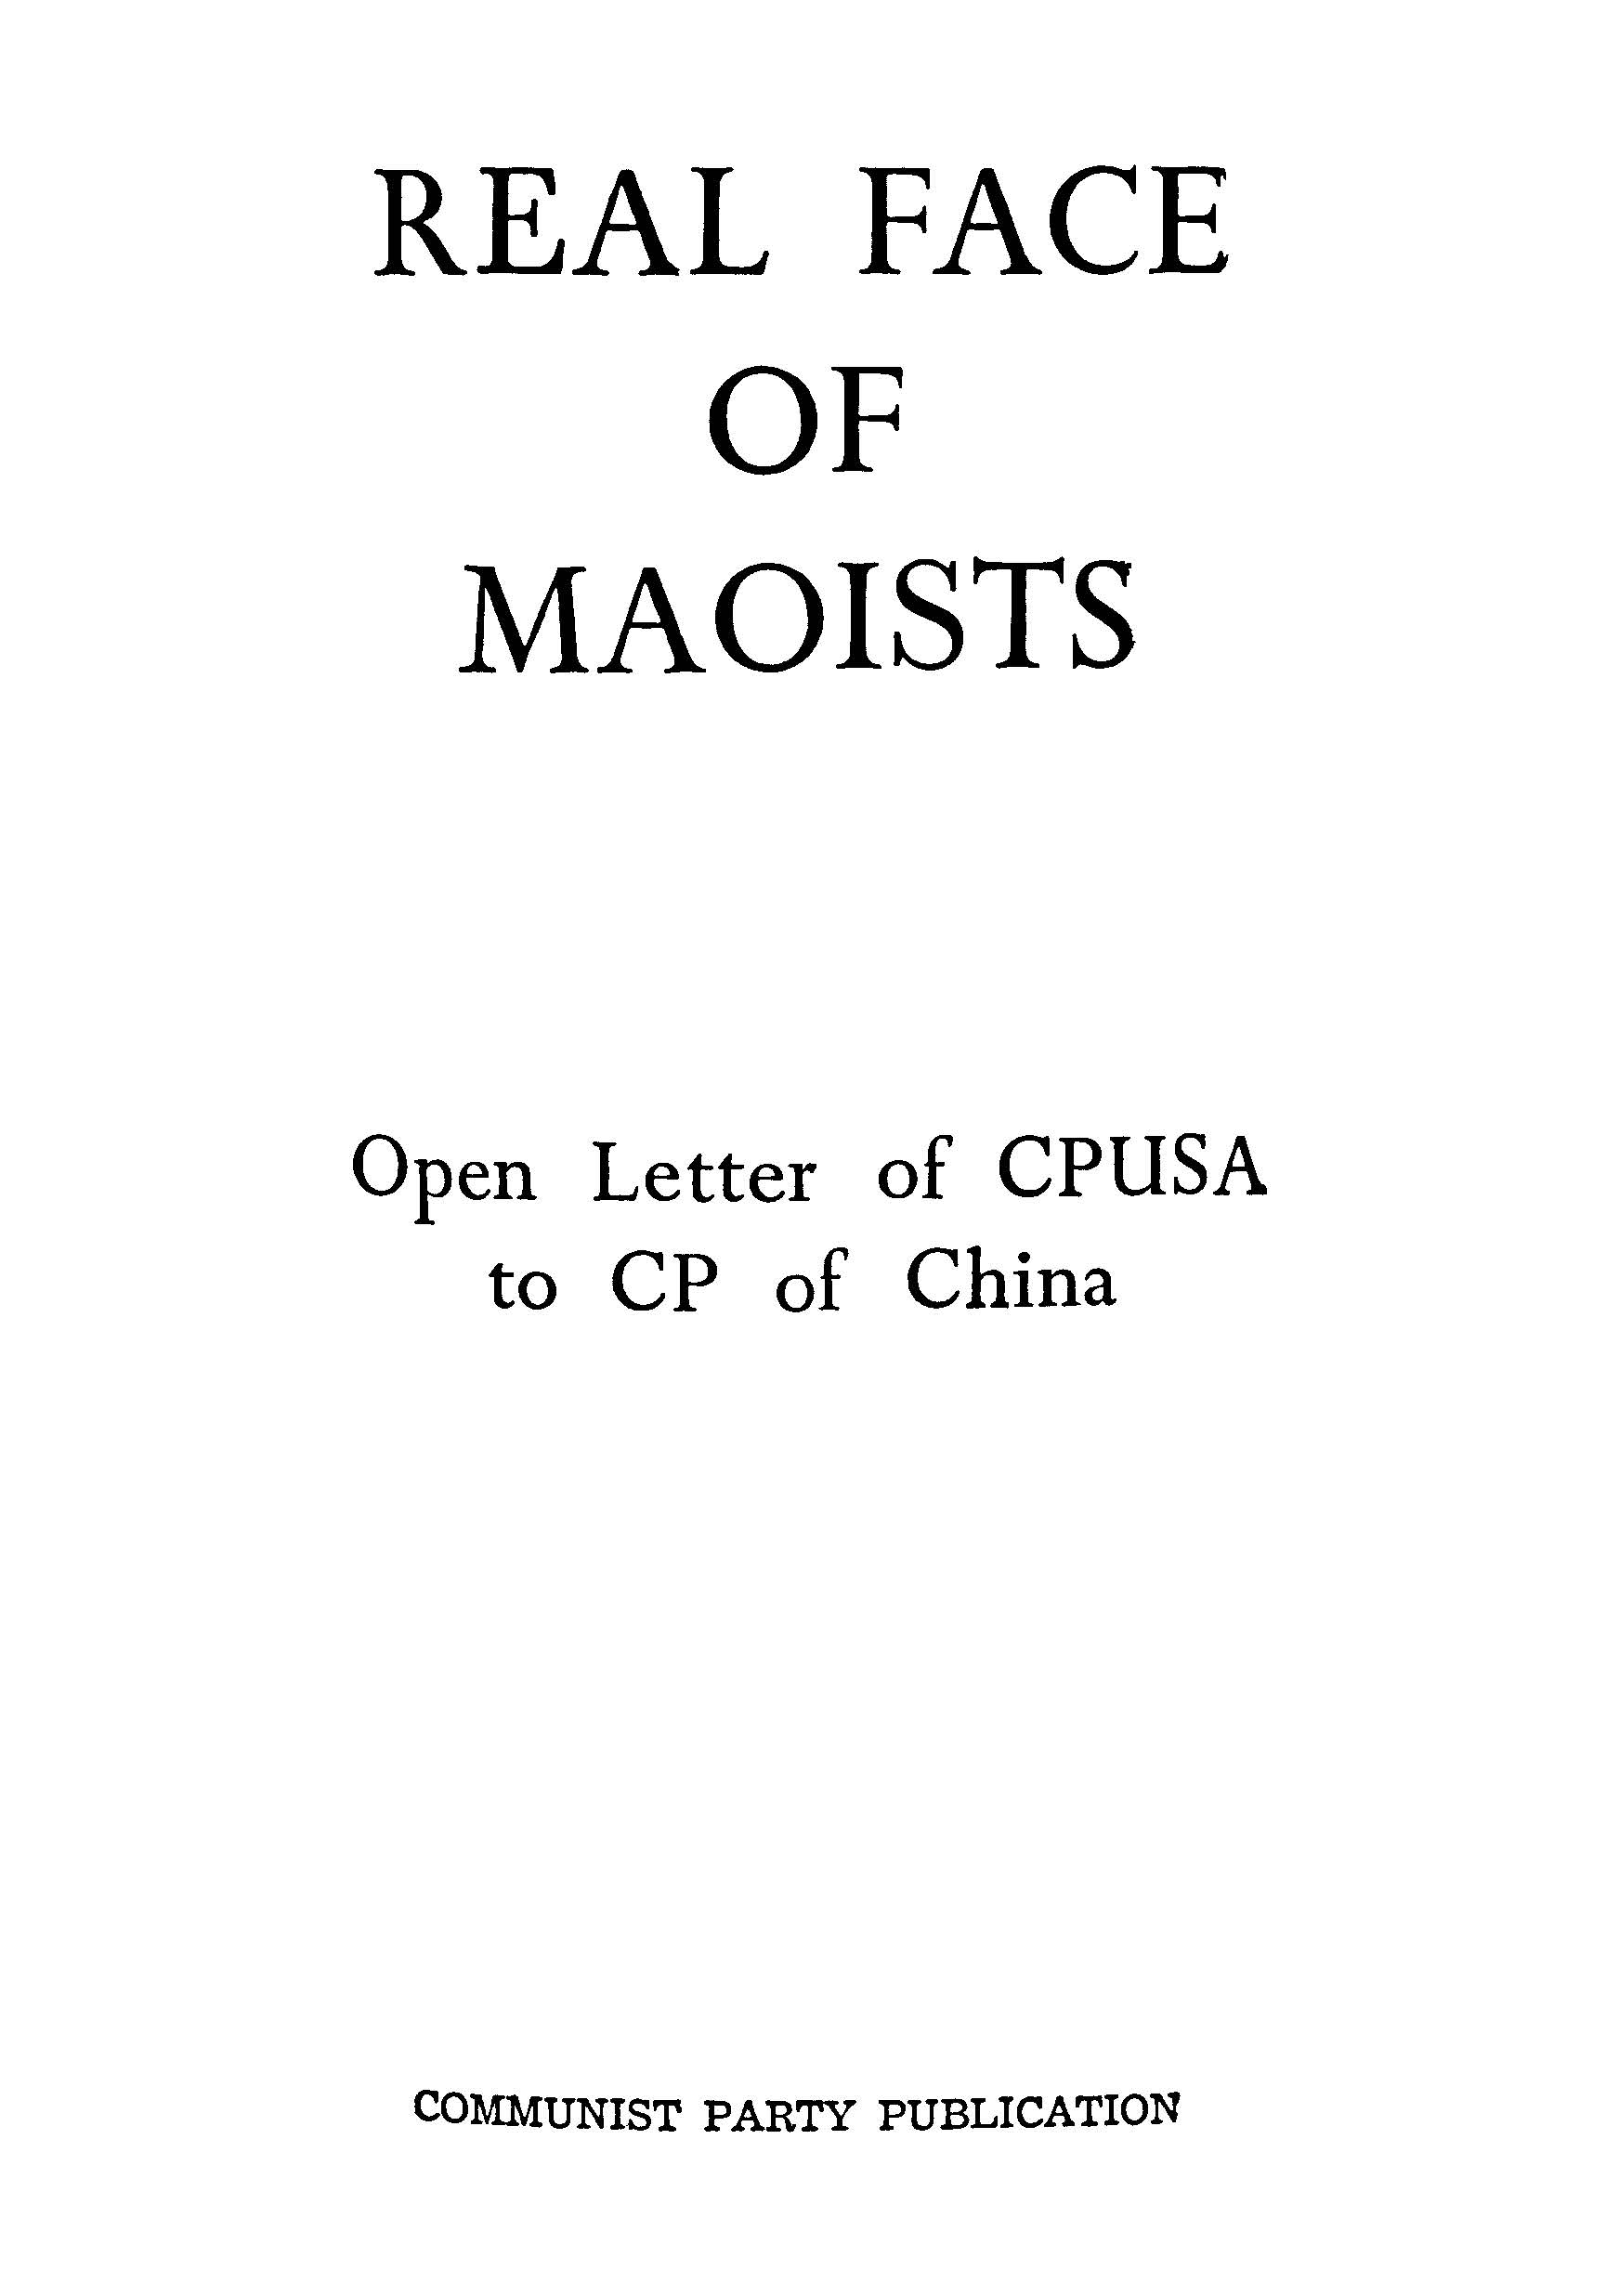 Real face of maolsts open letter of CPUSA to cp of china